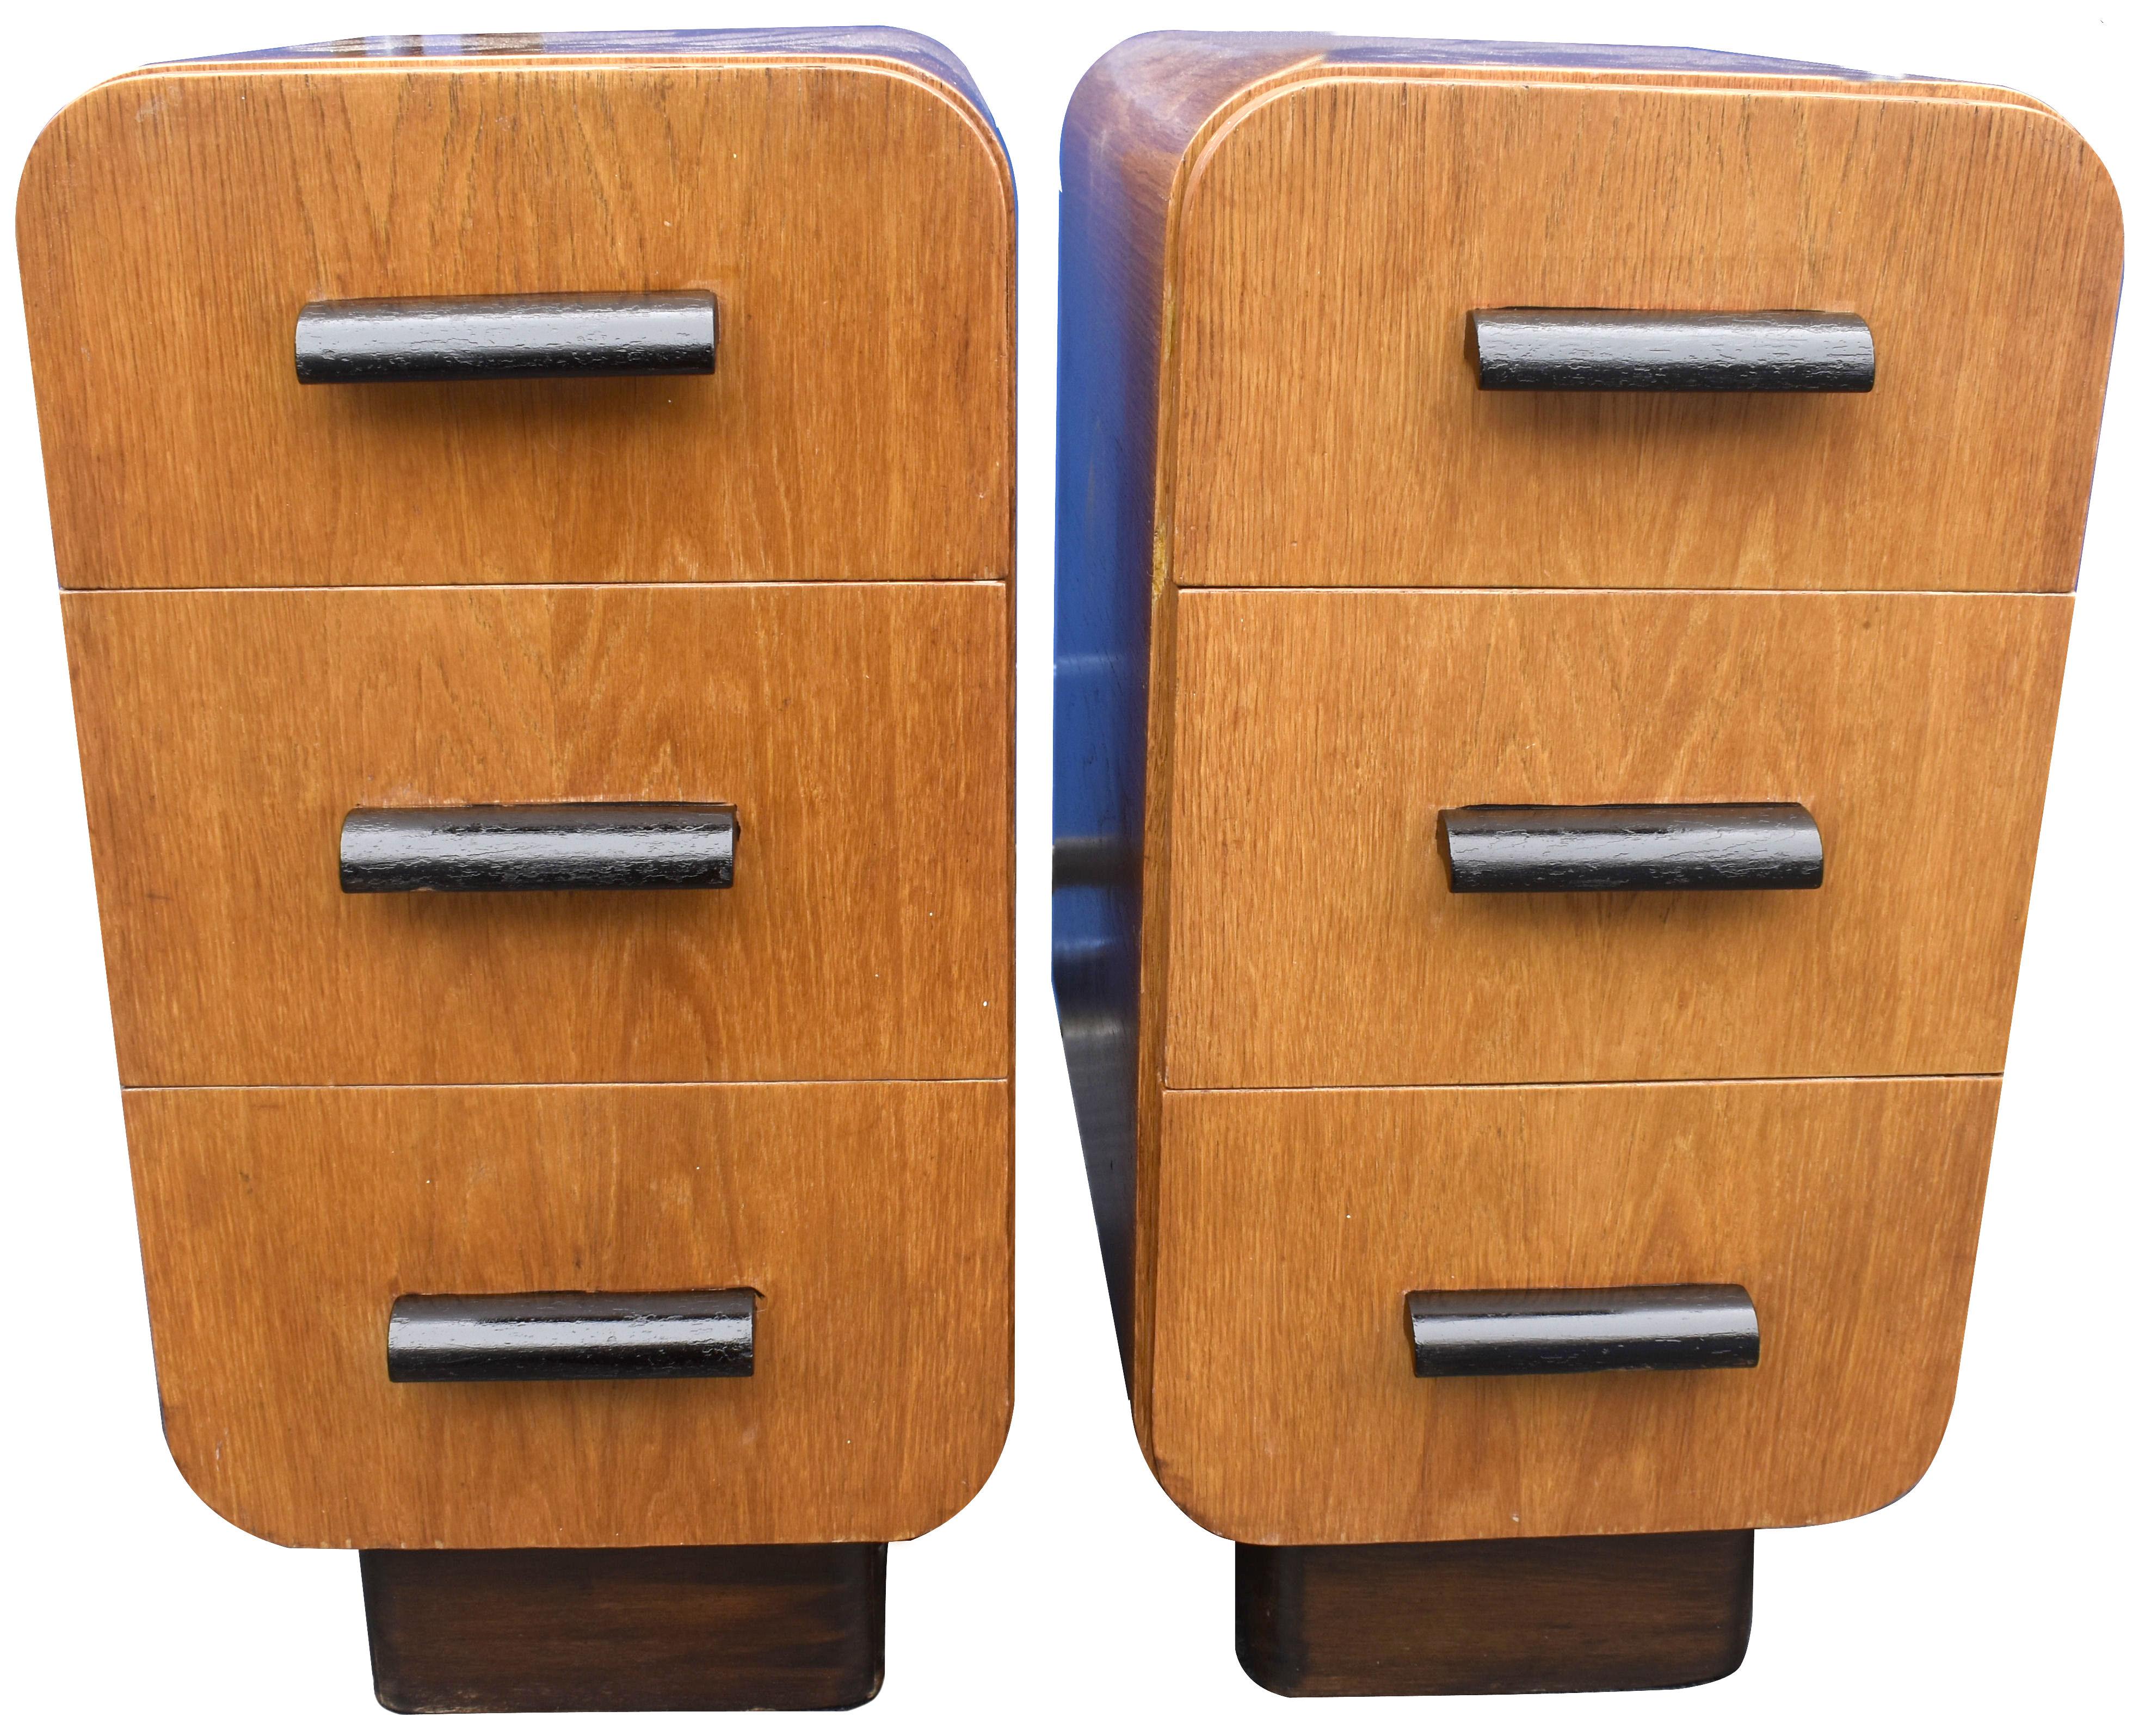 For your consideration are these fabulous matching pair of Art Deco modernist bedside cabinet tables, dating to the 1930's. For those less well versed in Art Deco could be forgiven in thinking these cabinets are modern such is the styling which is